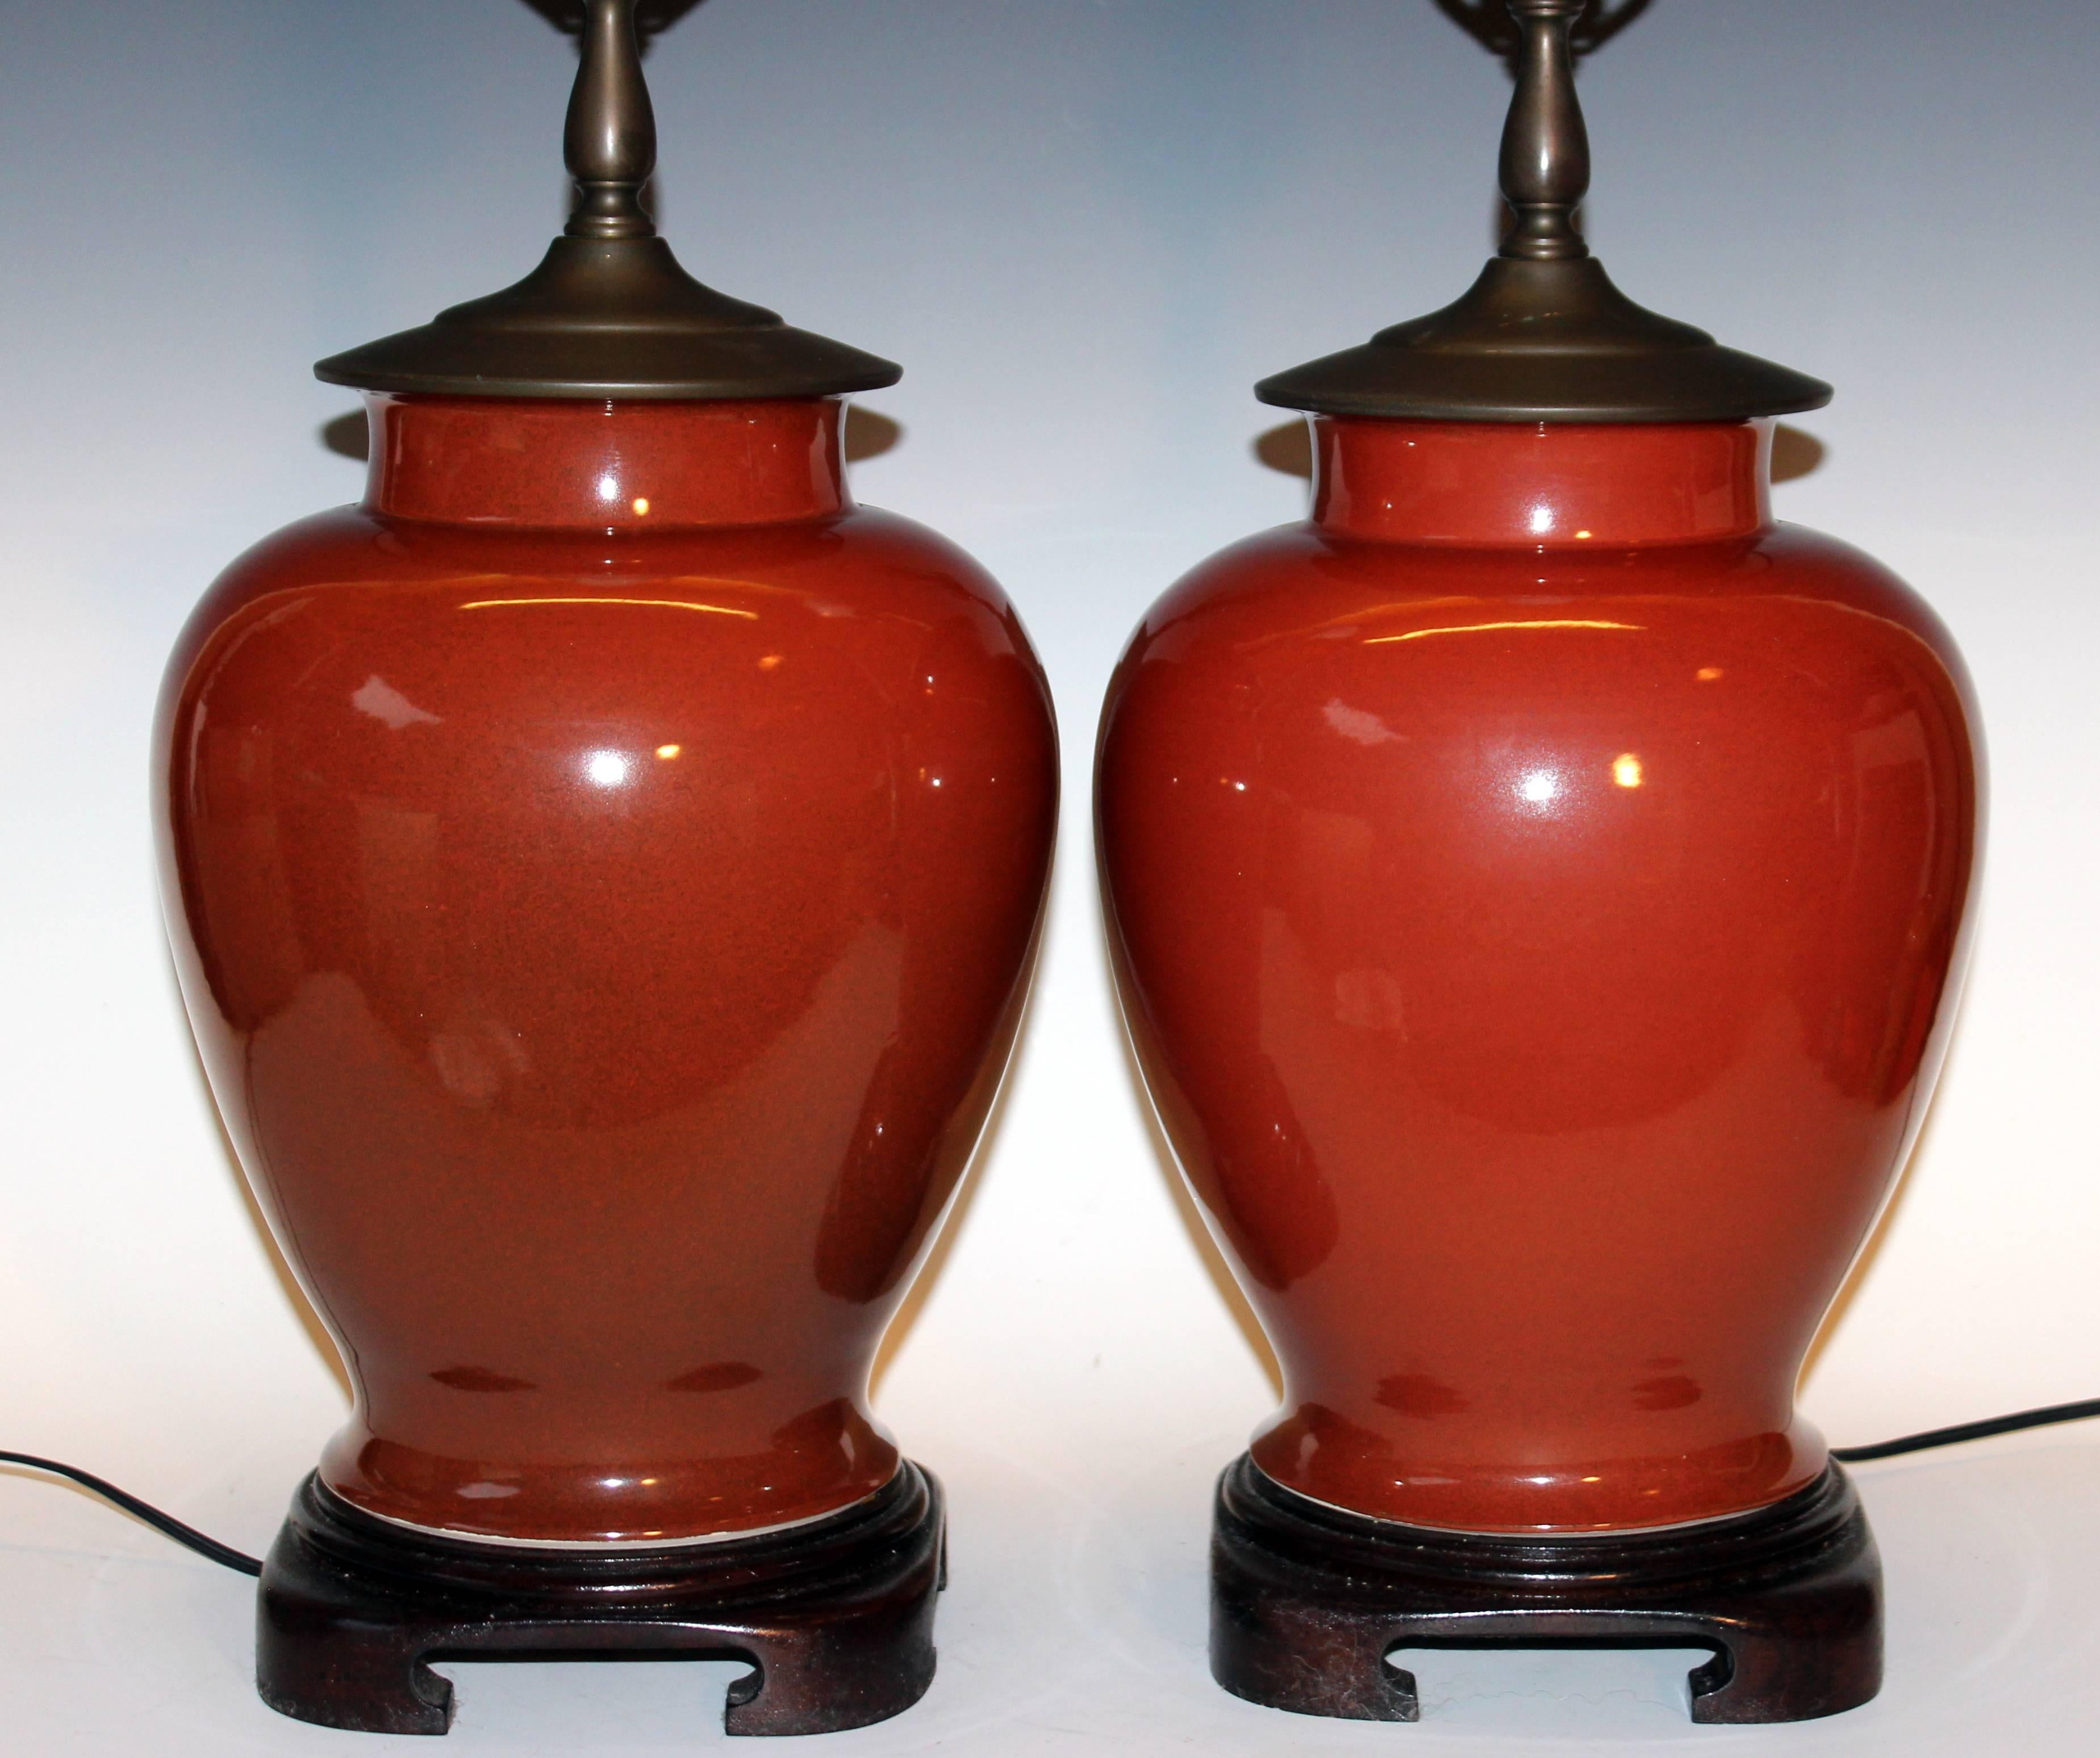 Qing Pair of Vintage Chinese Porcelain Iron Rust Cinnamon Brown Monochrome Vase Lamps